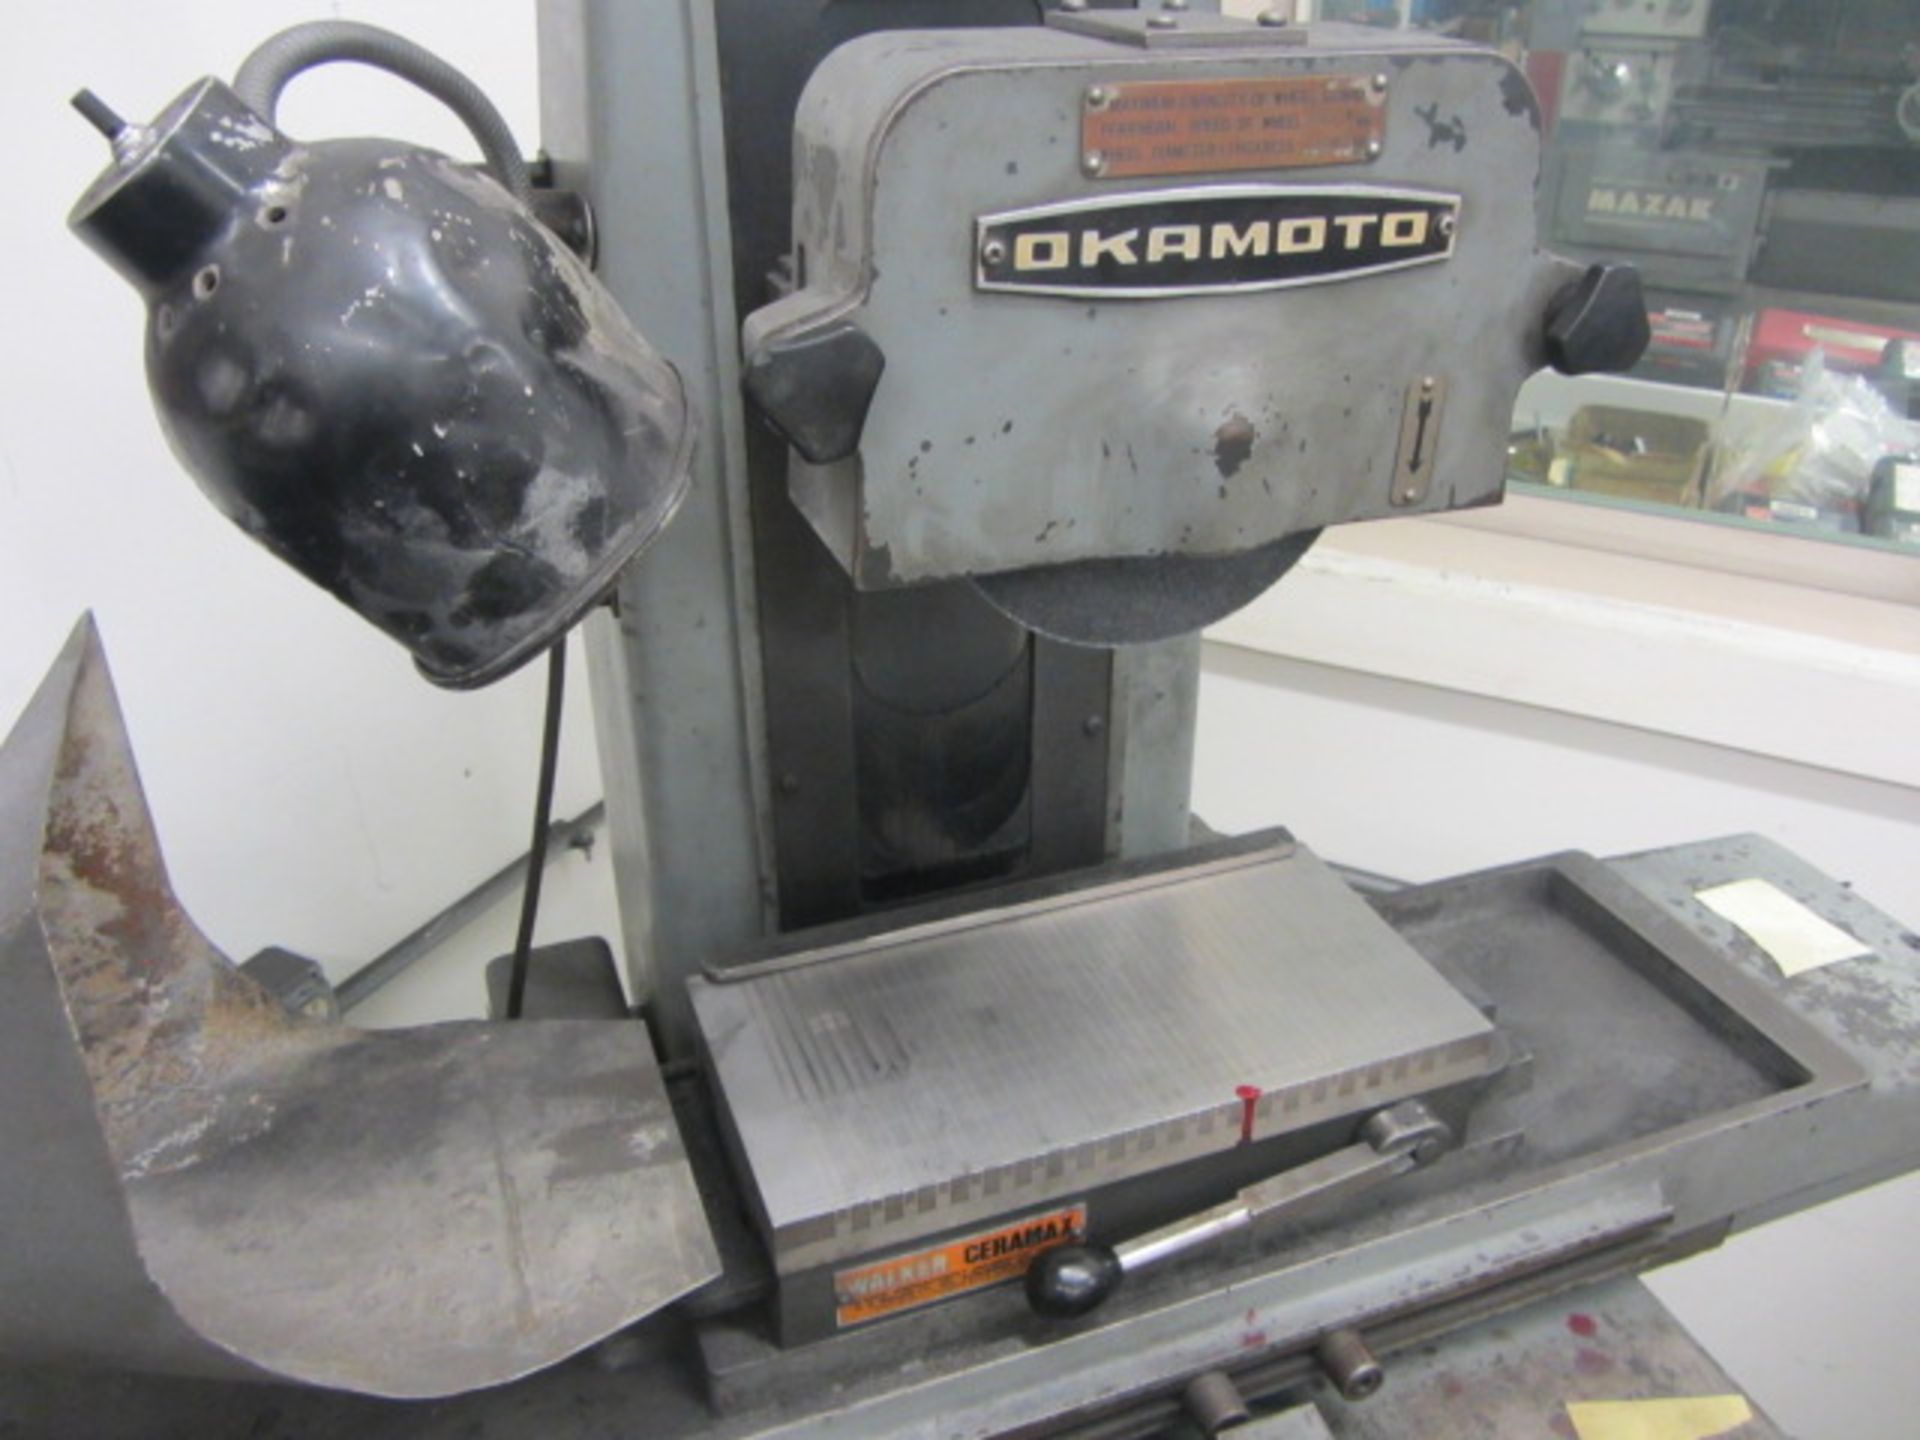 Okamoto OMA-350 6'' x 12'' Hand Feed Surface Grinder with Permanent Magnetic Chuck, sn:1625 - Image 3 of 5